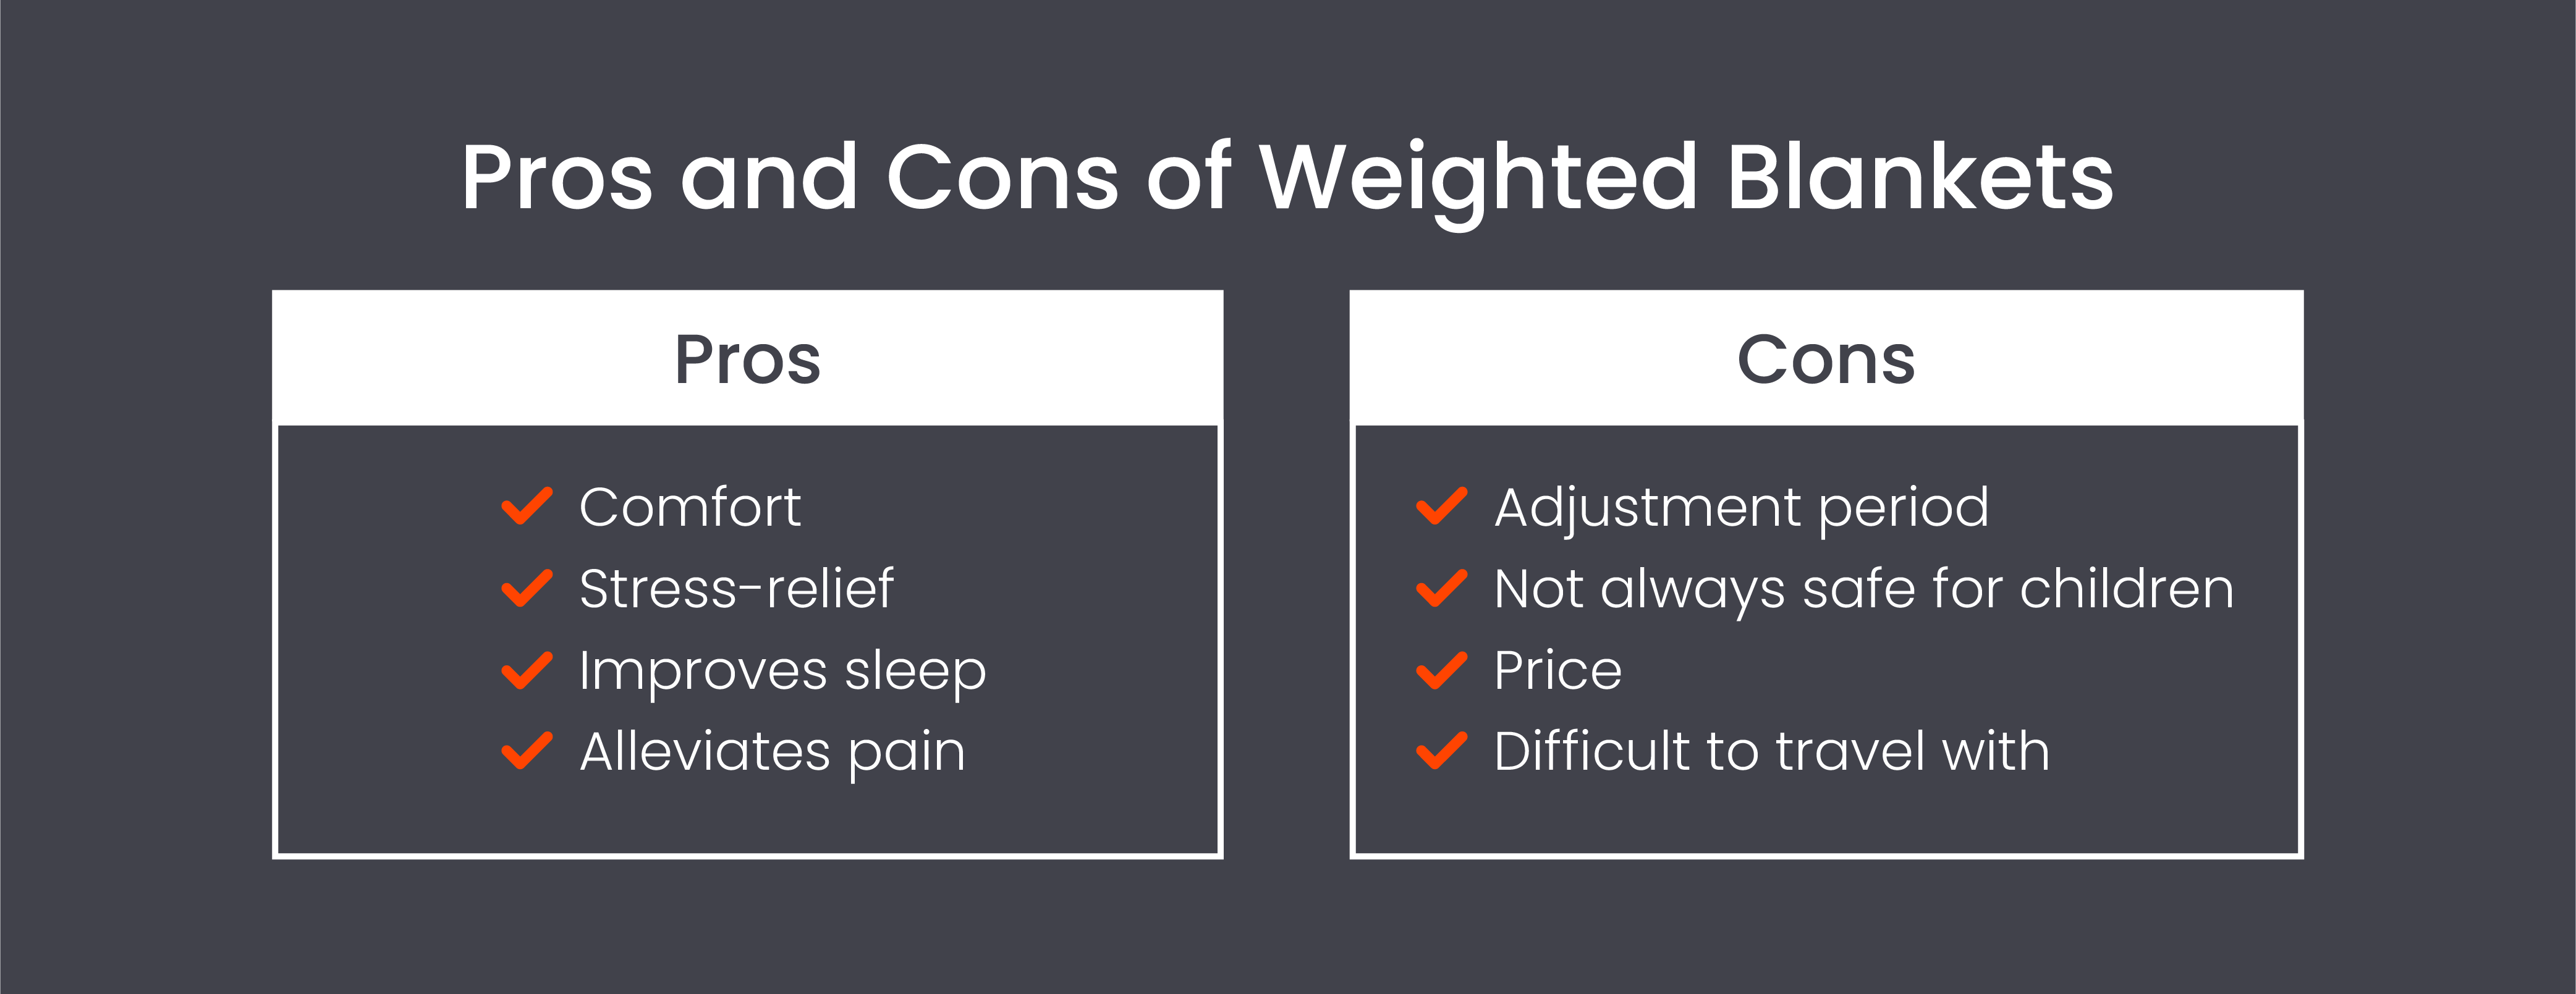 What Are the Pros and Cons of Weighted Blankets